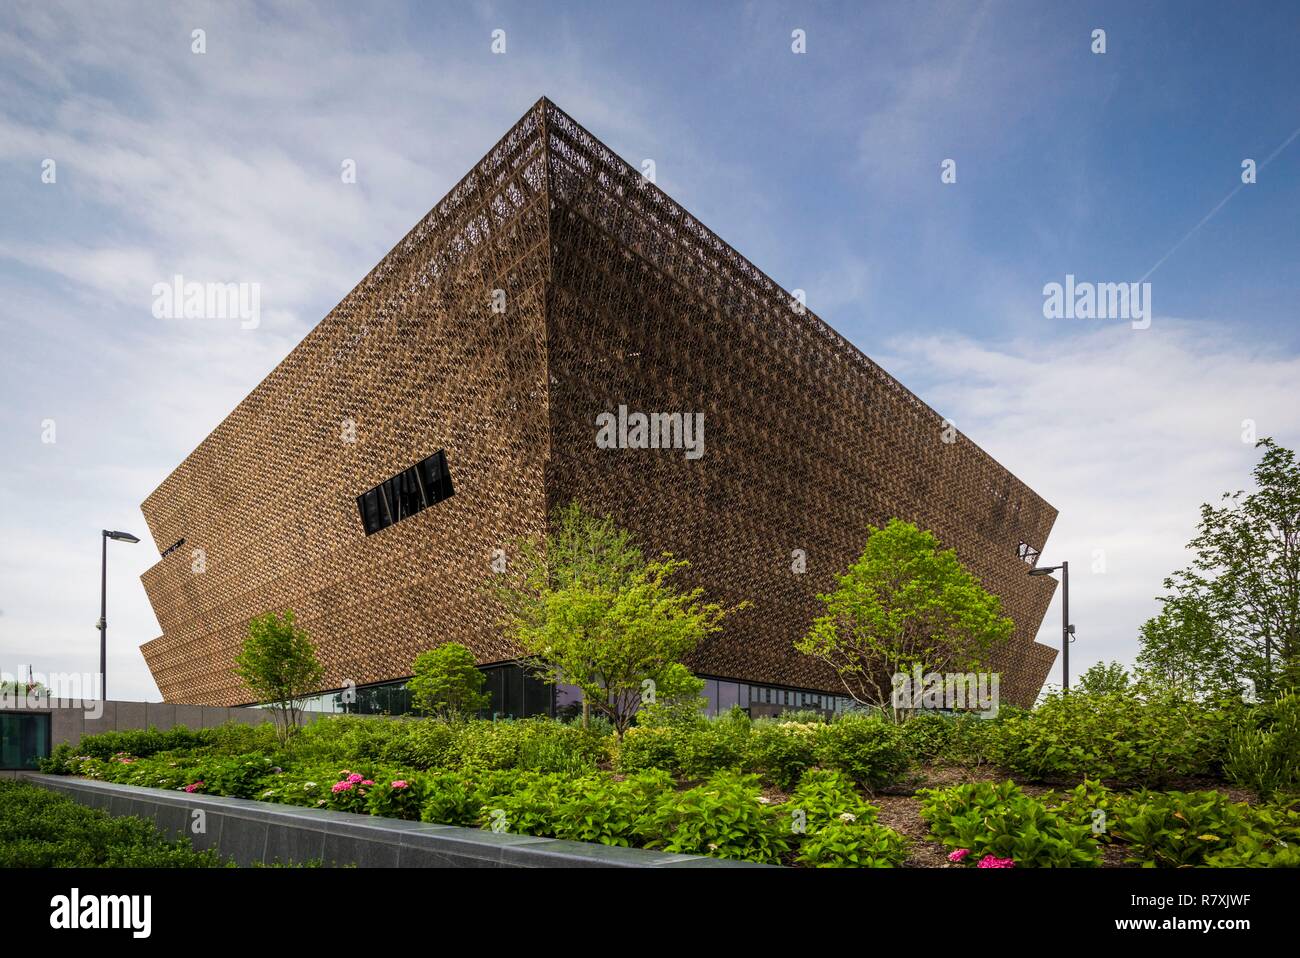 United States, District of Columbia, Washington, National Mall, National African-American Museum, außen Stockfoto